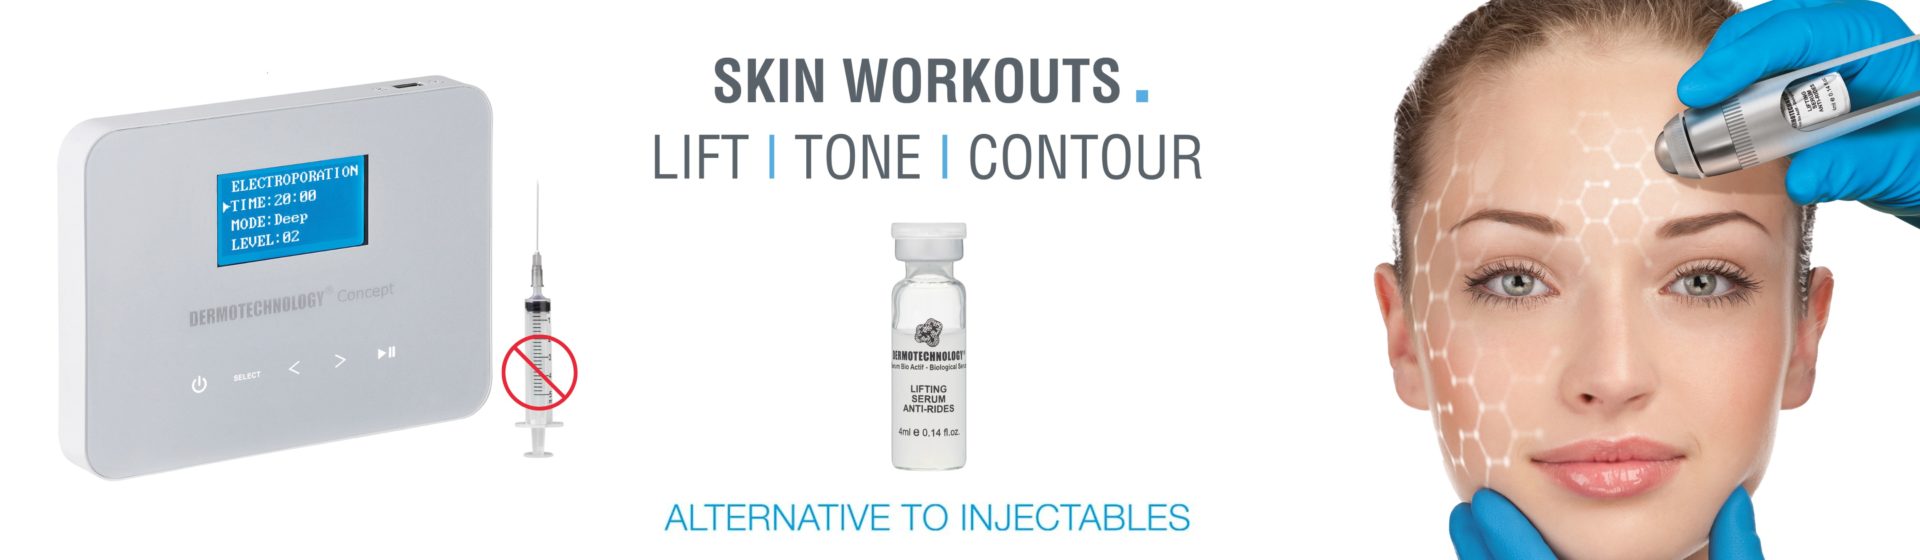 Advertisement for a non-invasive skin treatment device and serum, highlighting an alternative to injectable treatments with a focus on lifting, toning, and contouring skin.